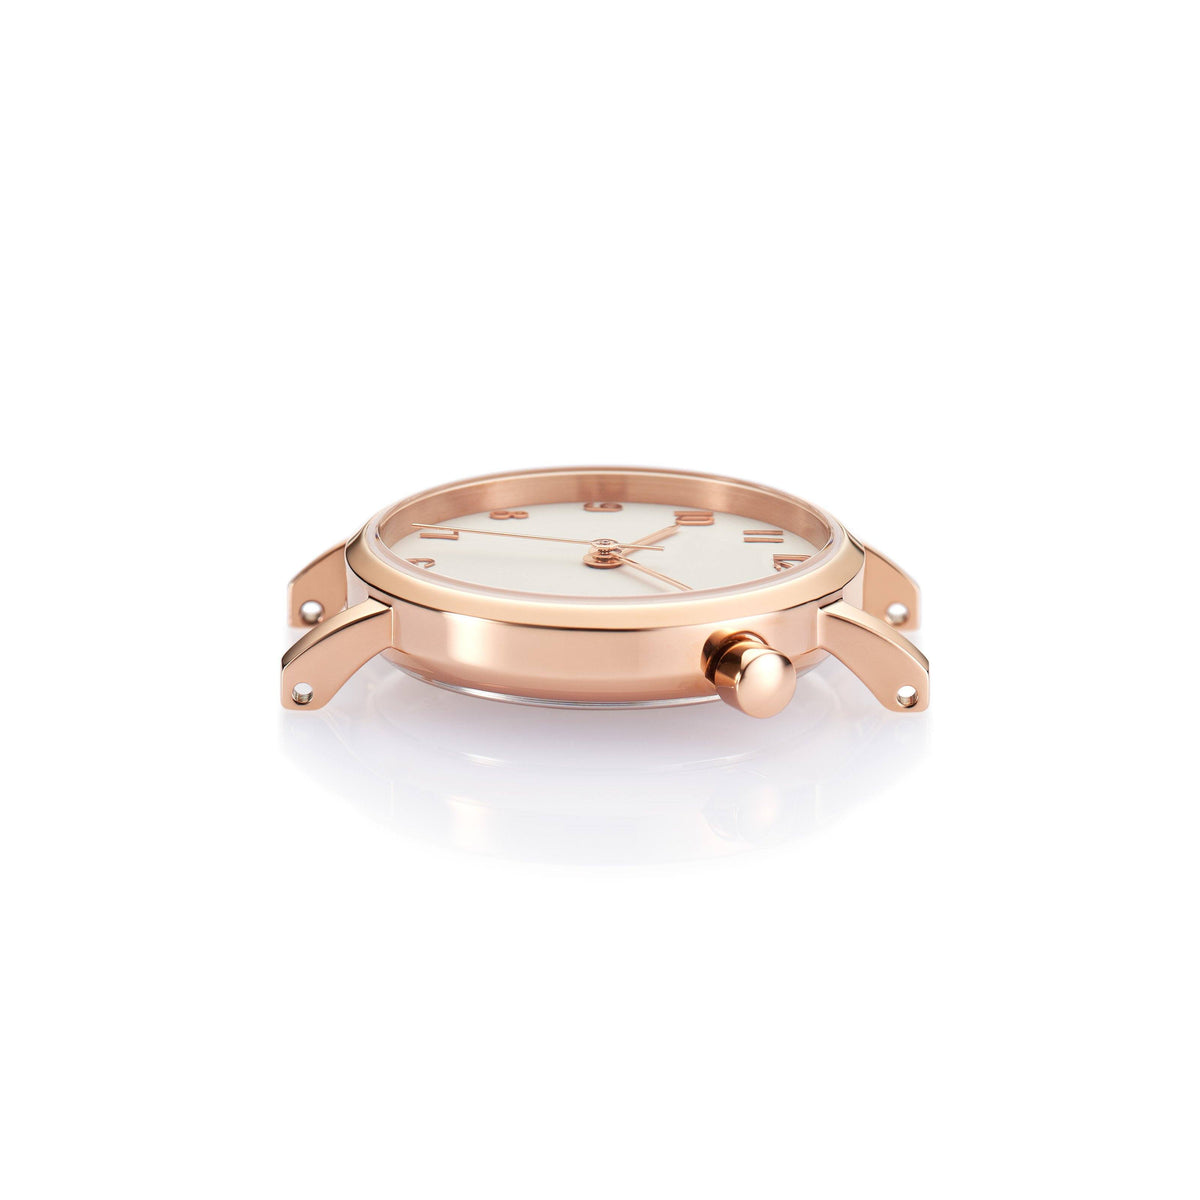 The White and Rose Gold Watch - Butterfly (Kids)